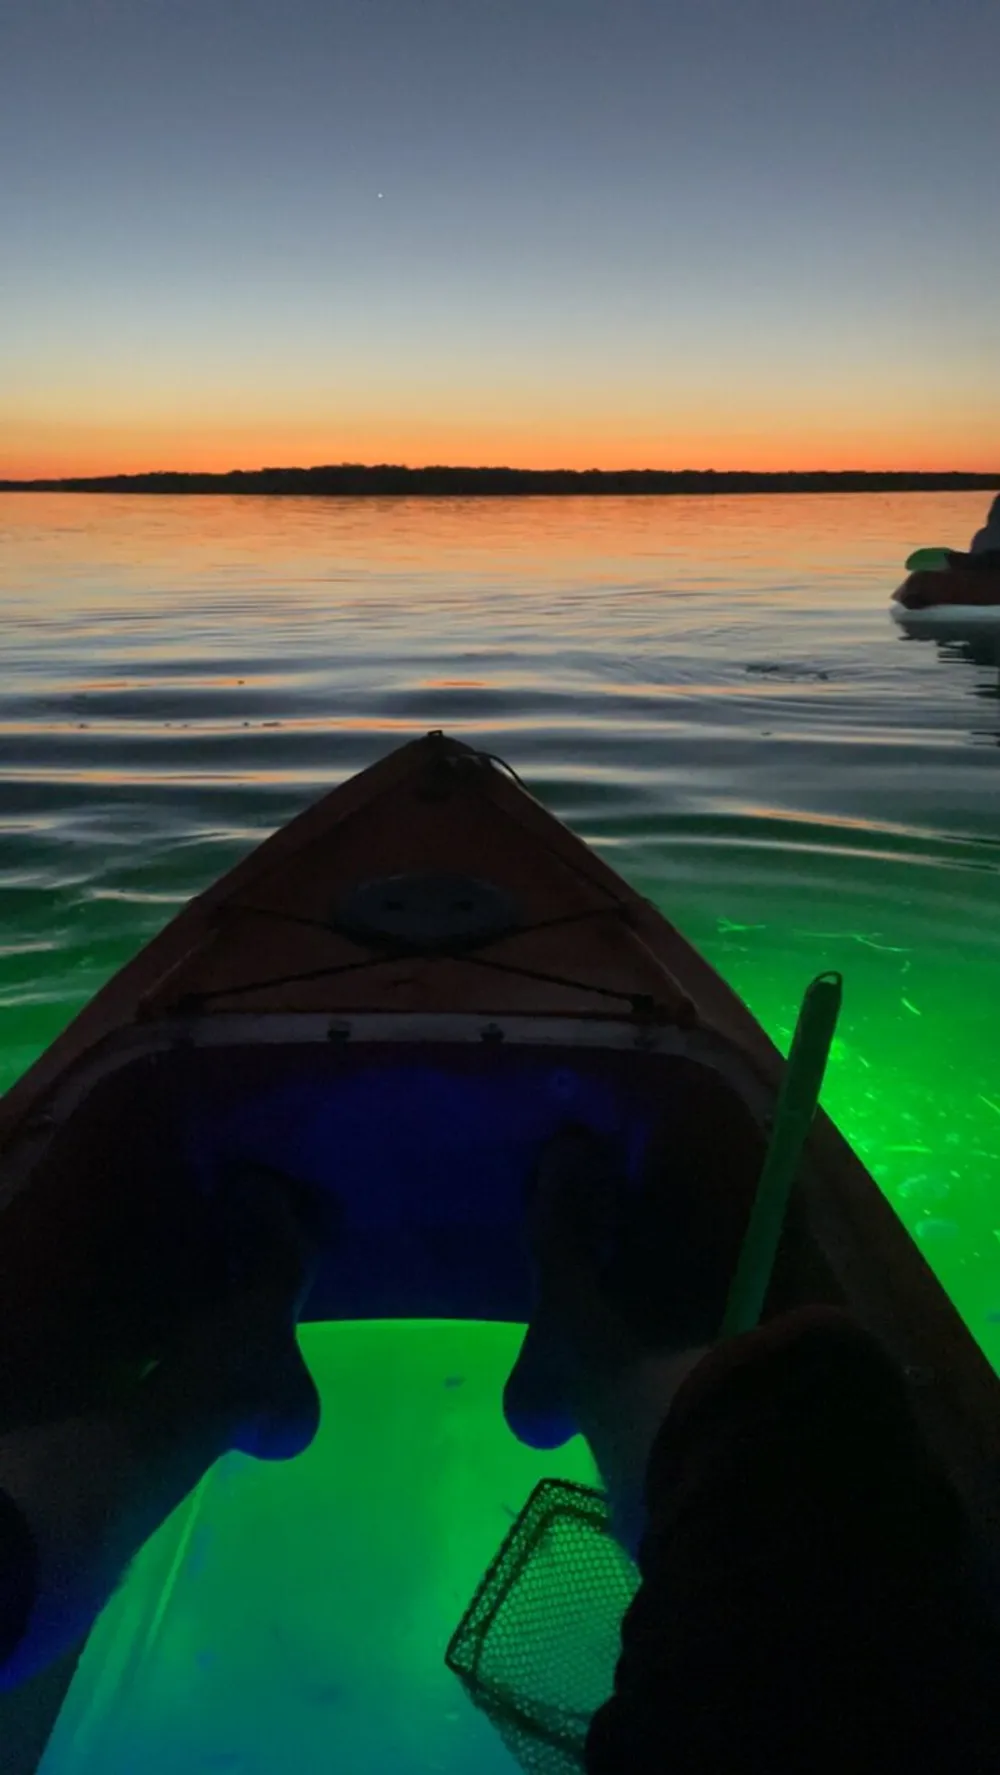 A person is kayaking on calm waters at dusk with a vivid display of sunset colors above and illuminated green water below